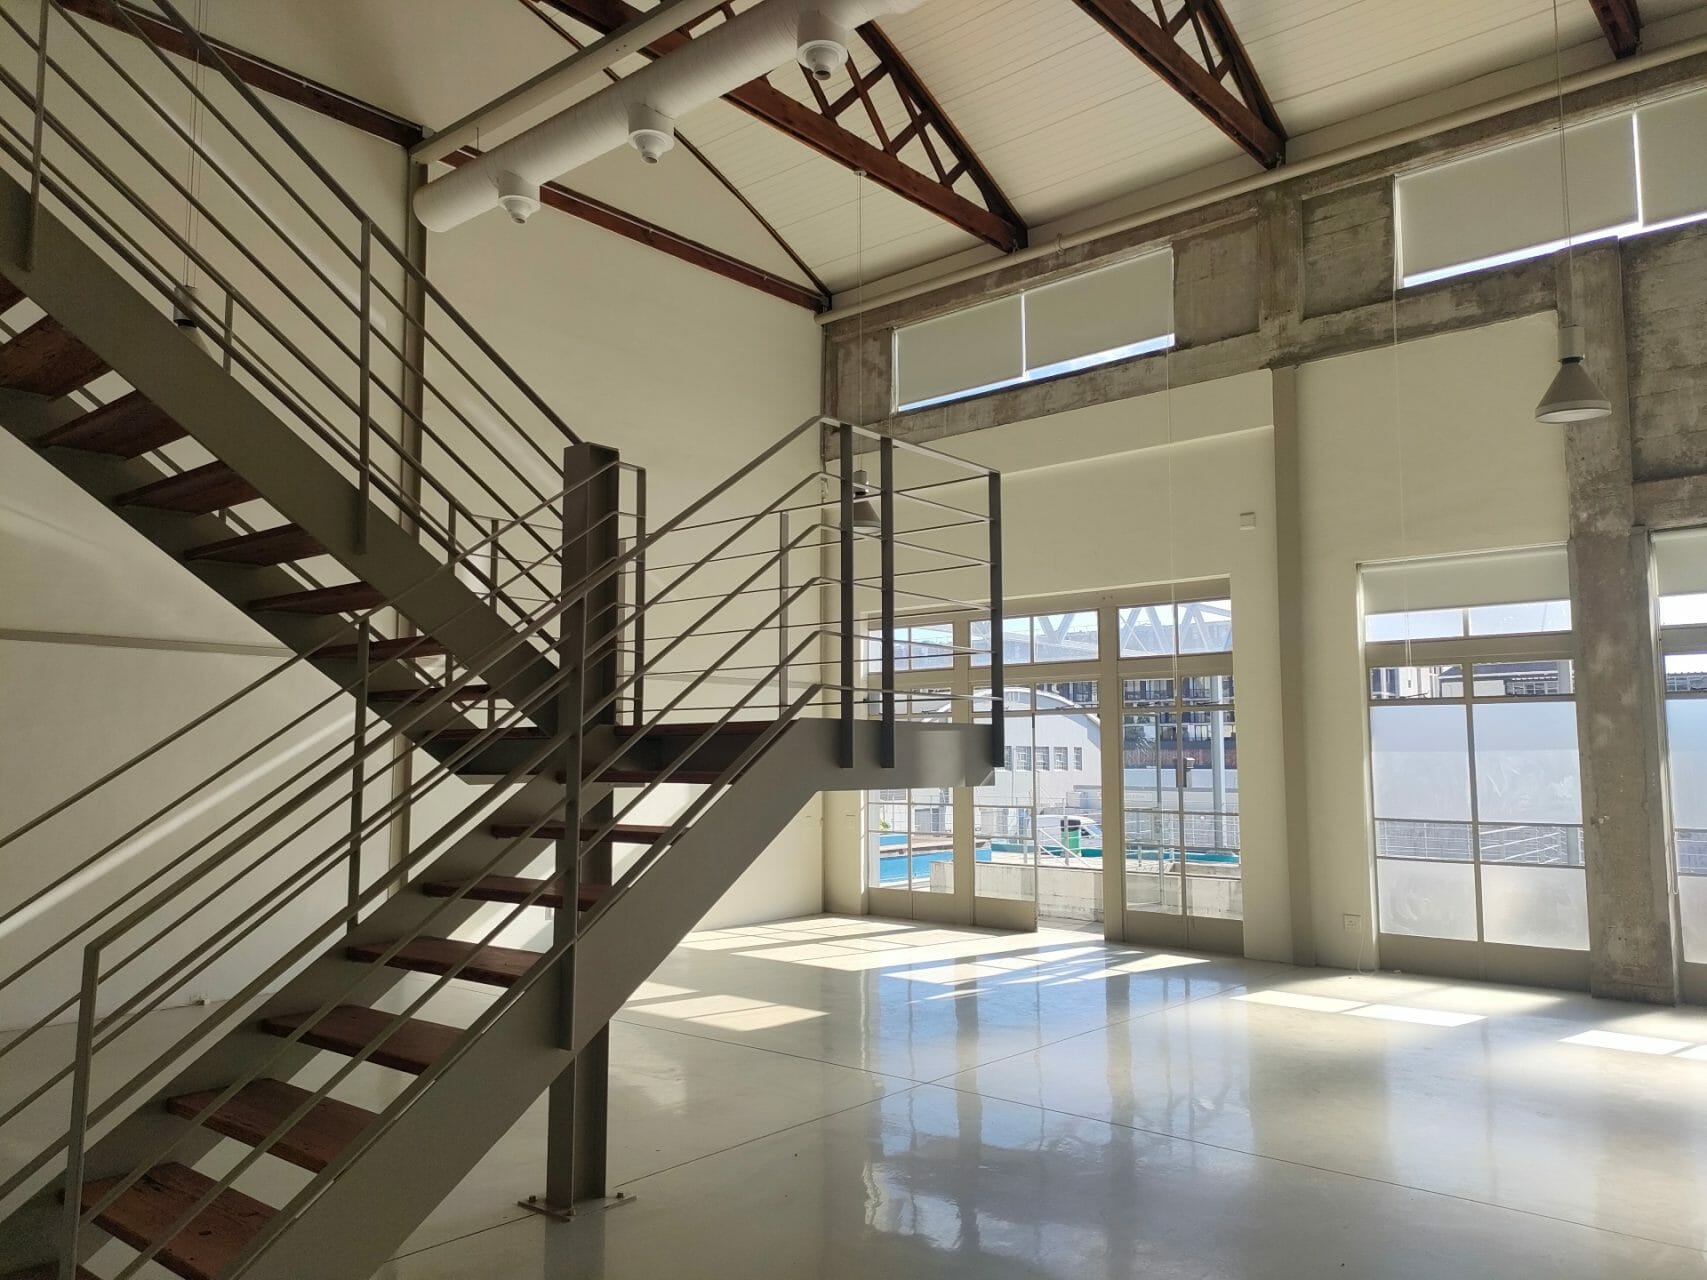 200m² – Ground floor office space available at The Stockyard in Woodstock.